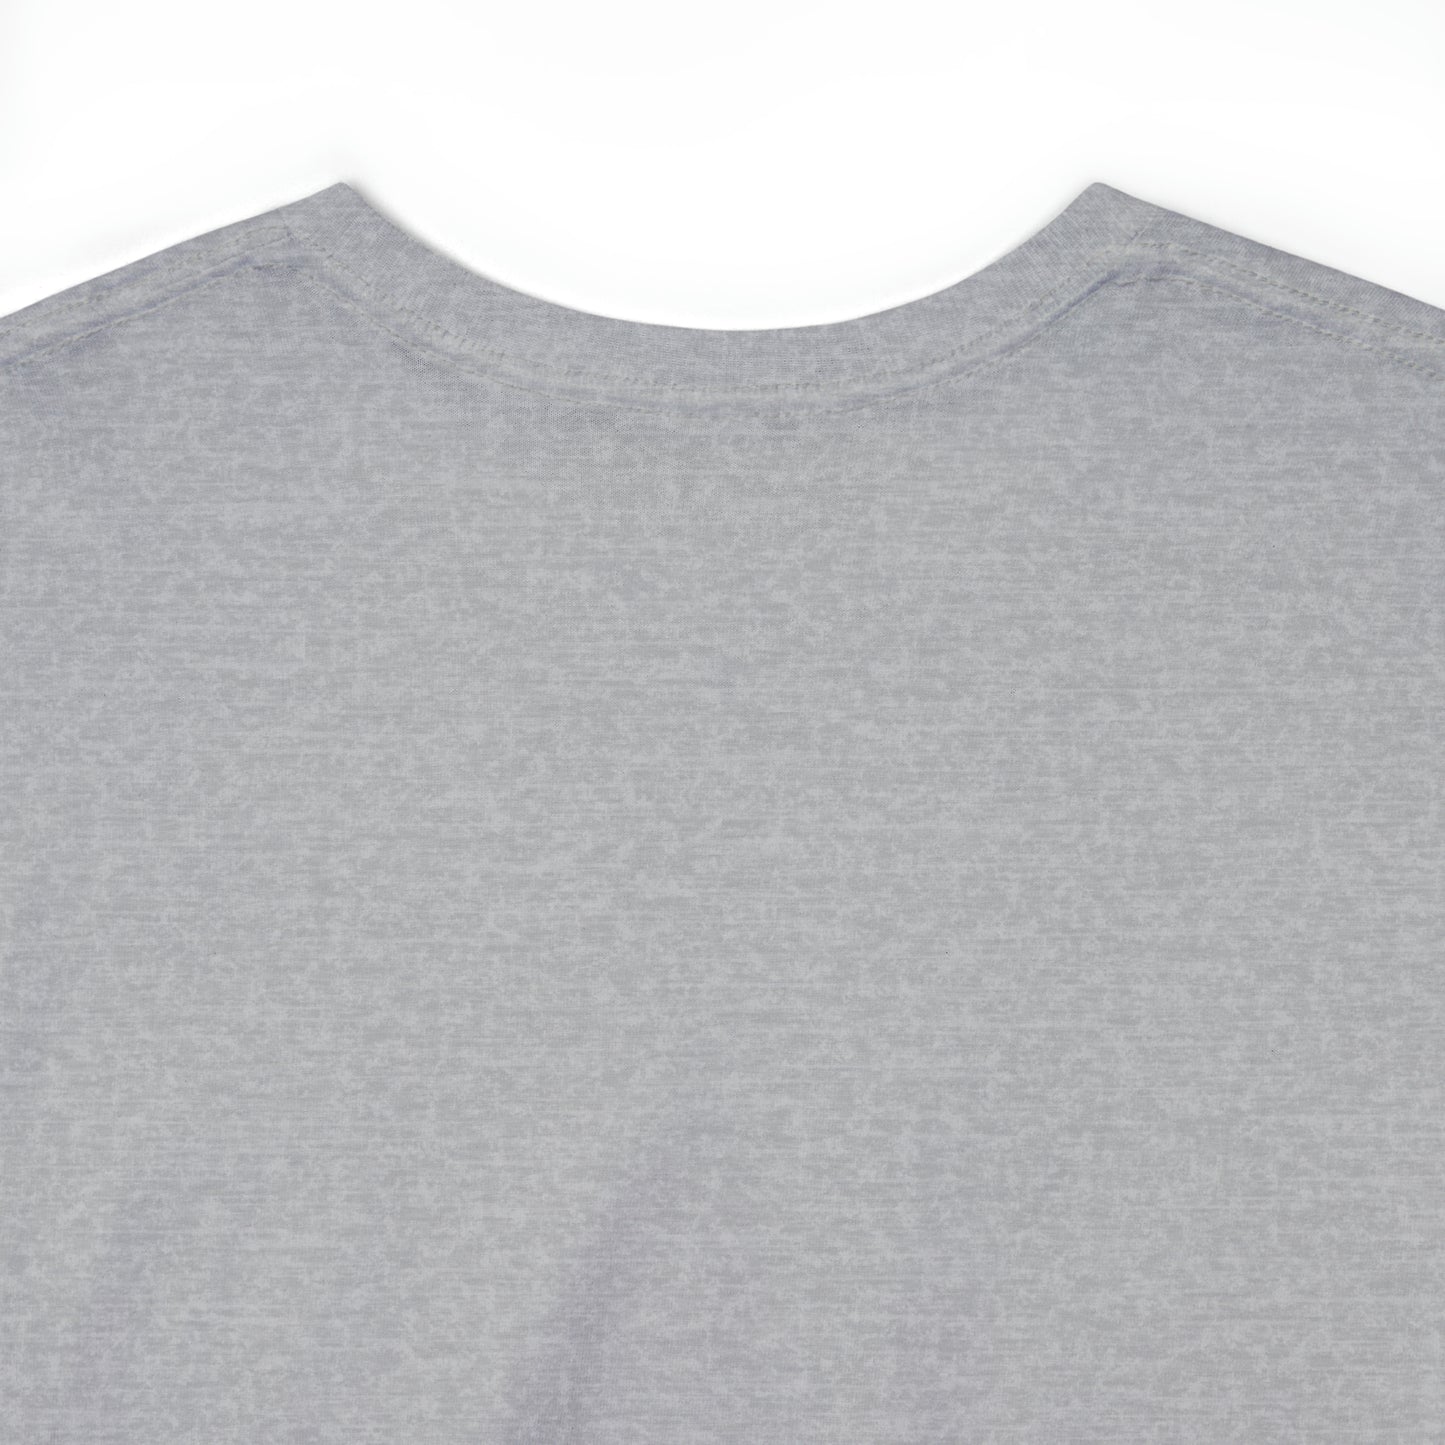 'Liminal Echoes' Cotton Tee